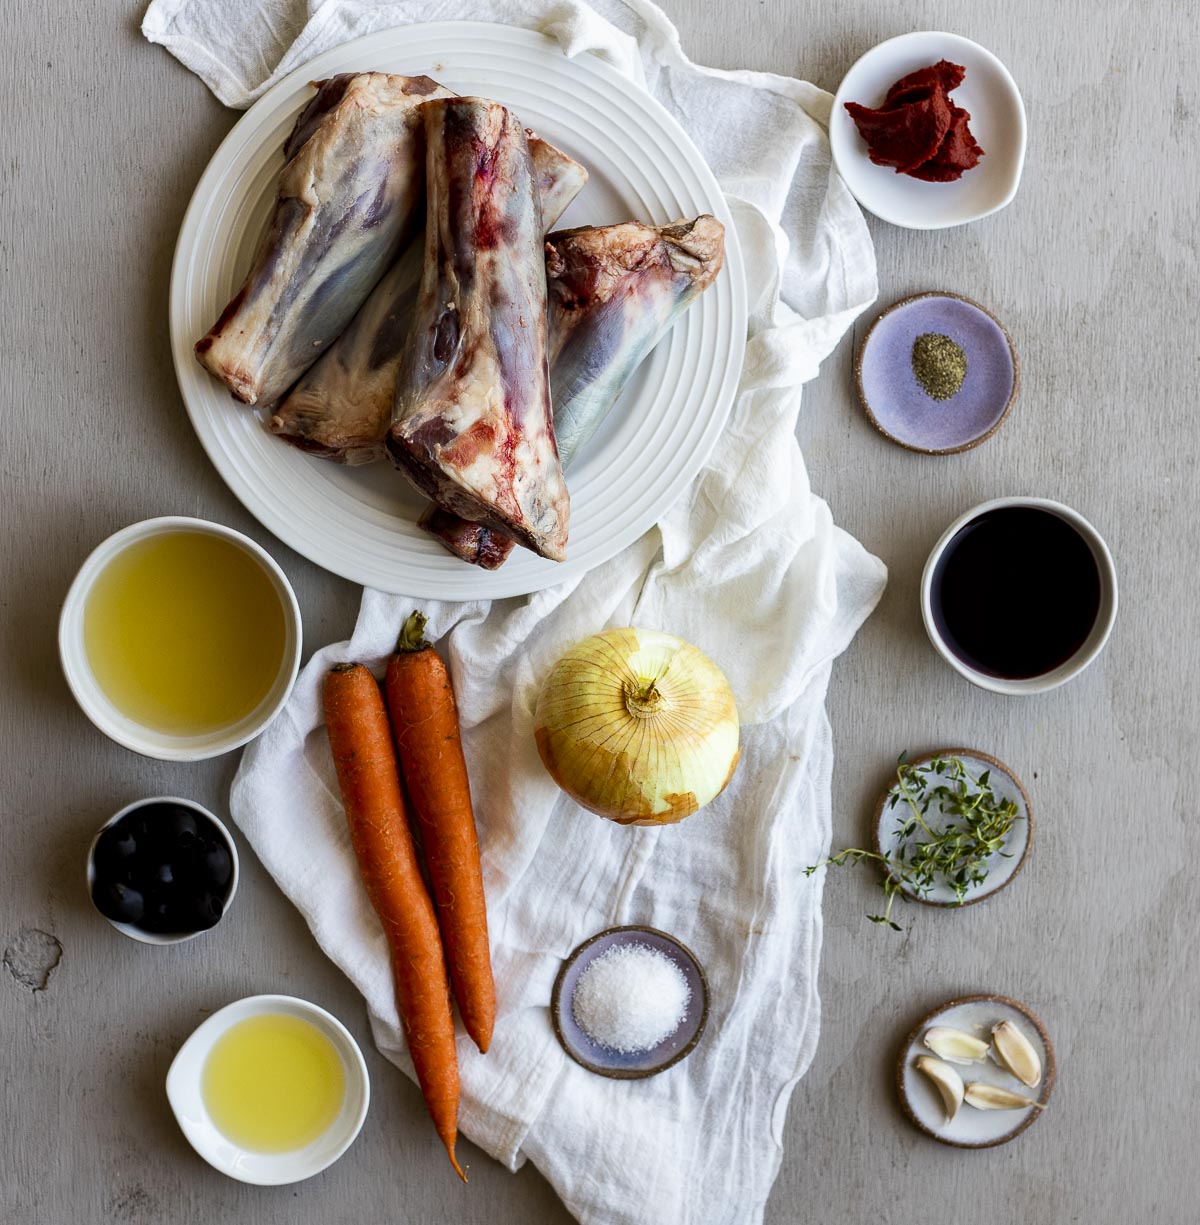 Overhead view of ingredients to make Instant Pot lamb shanks arranged individually on a white cloth.